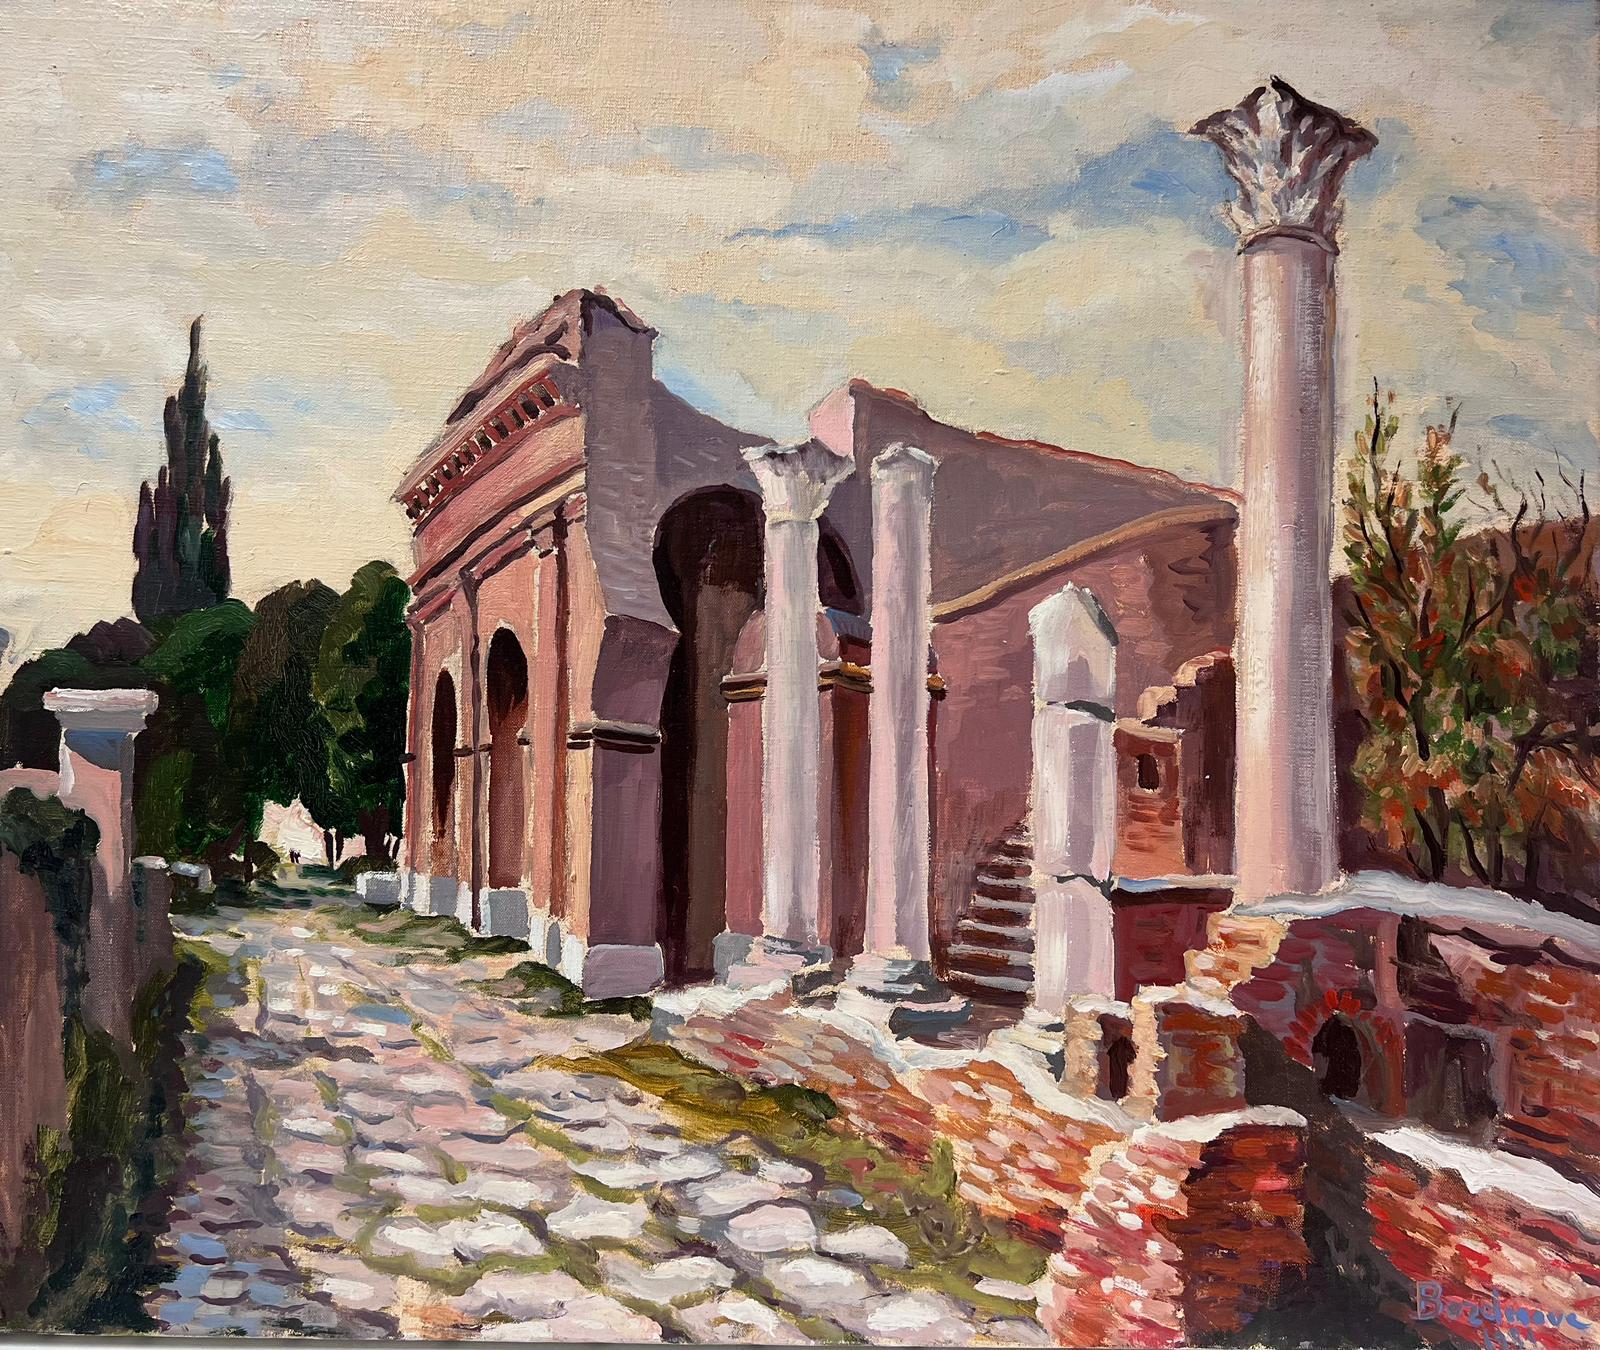 Georges Bordonove Landscape Painting - Pink Stone Pillar Building Ruins Contemporary French Impressionist Oil